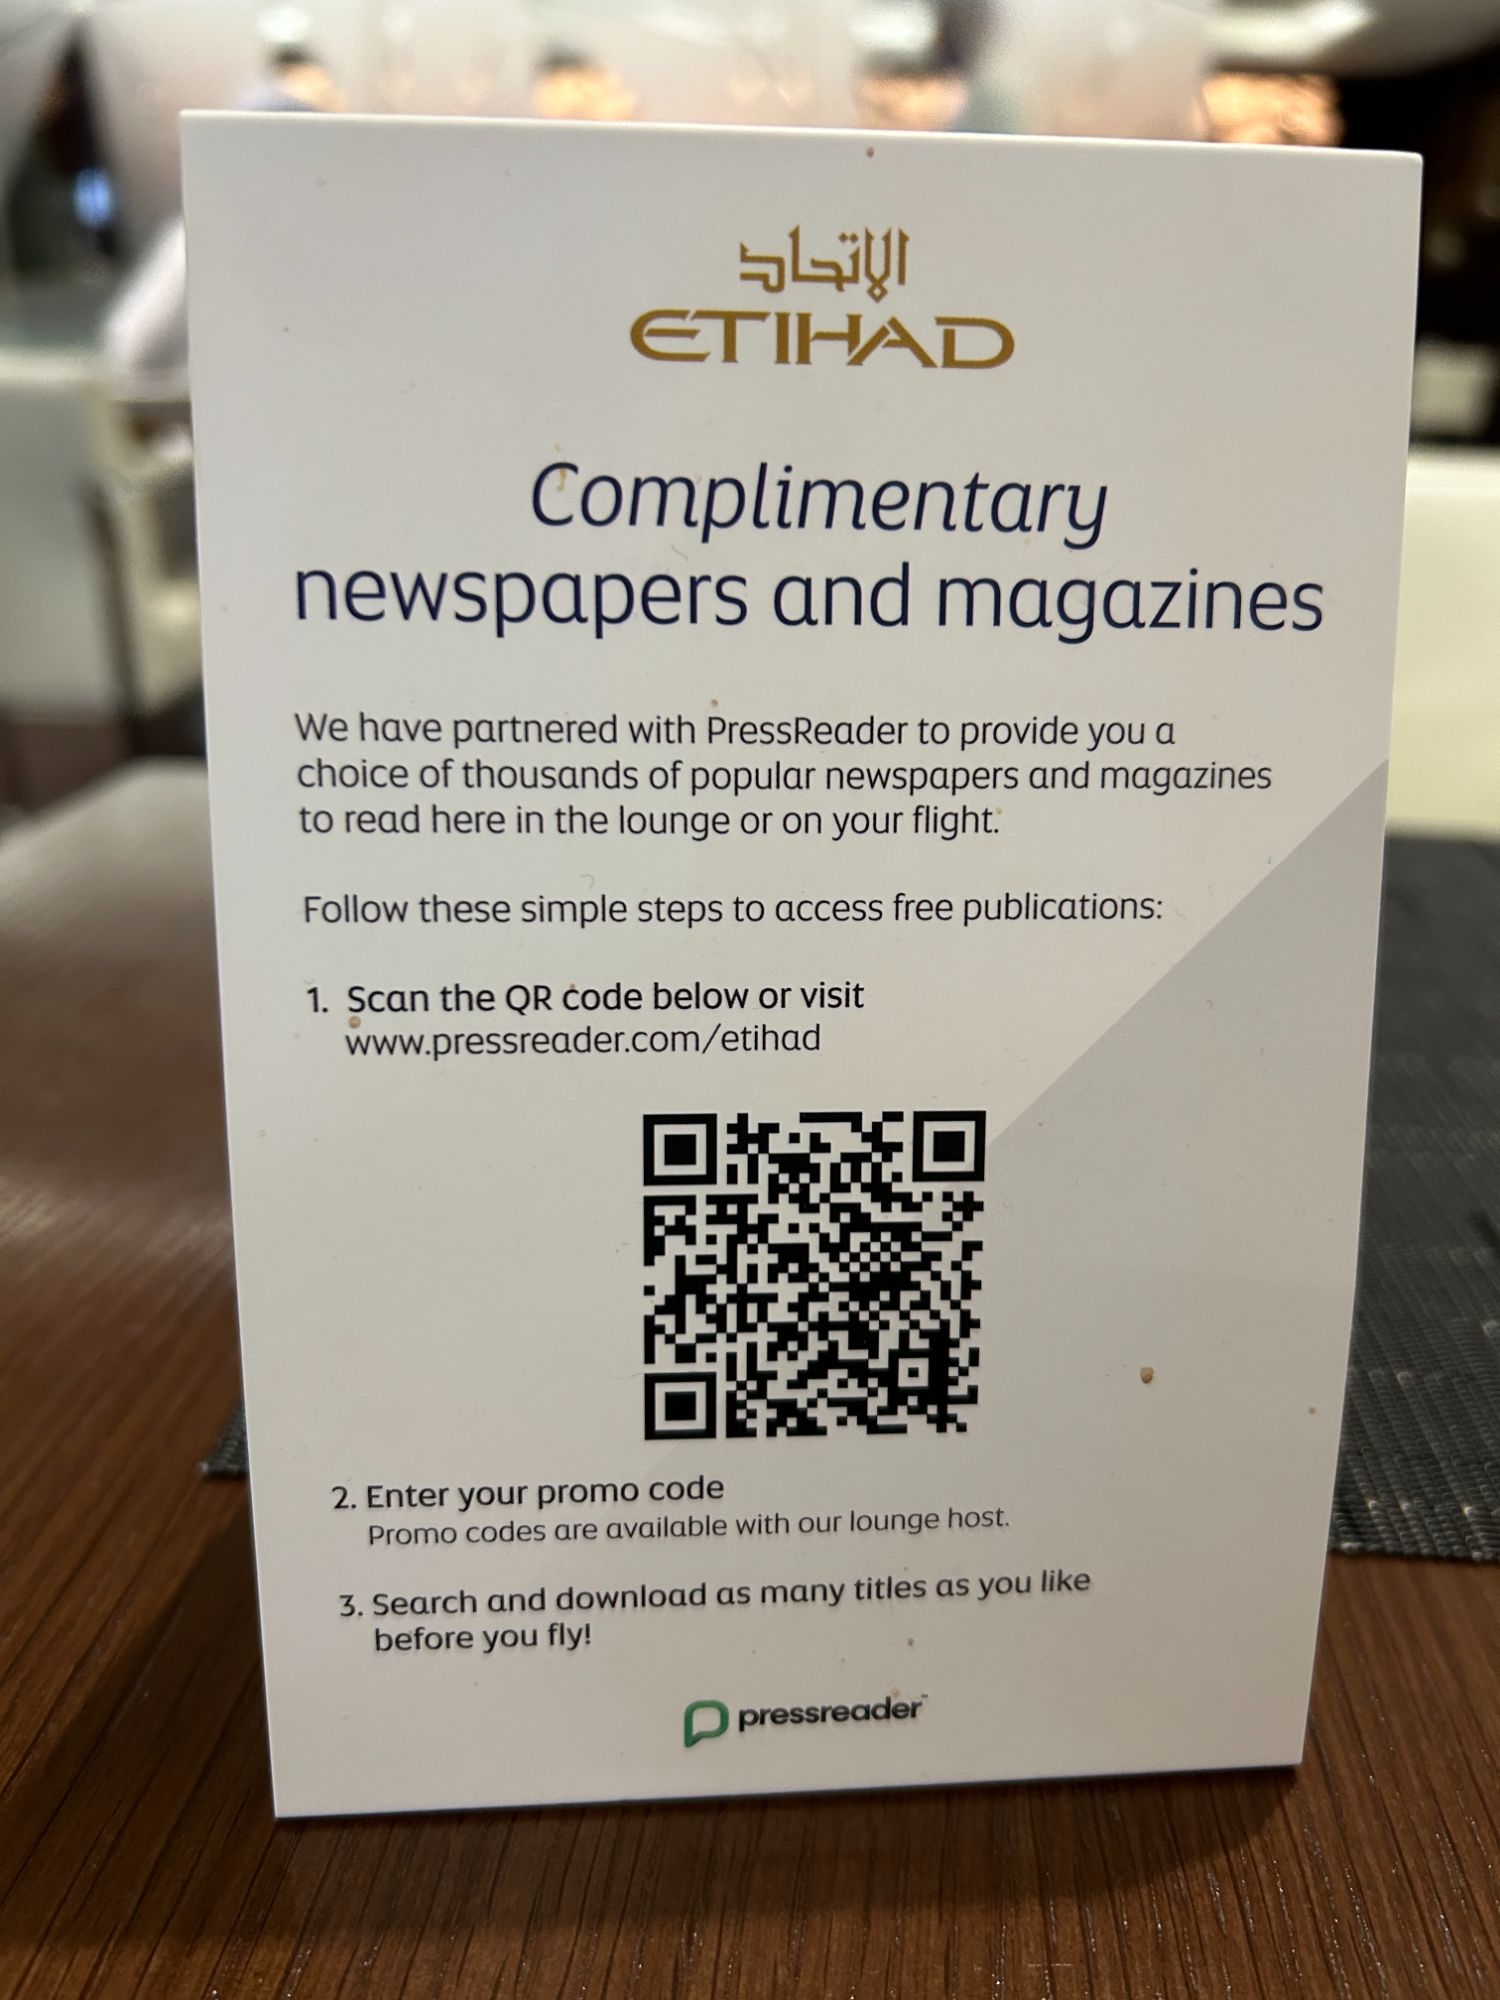 Etihad business class lounge complimentary newspapers and magazines